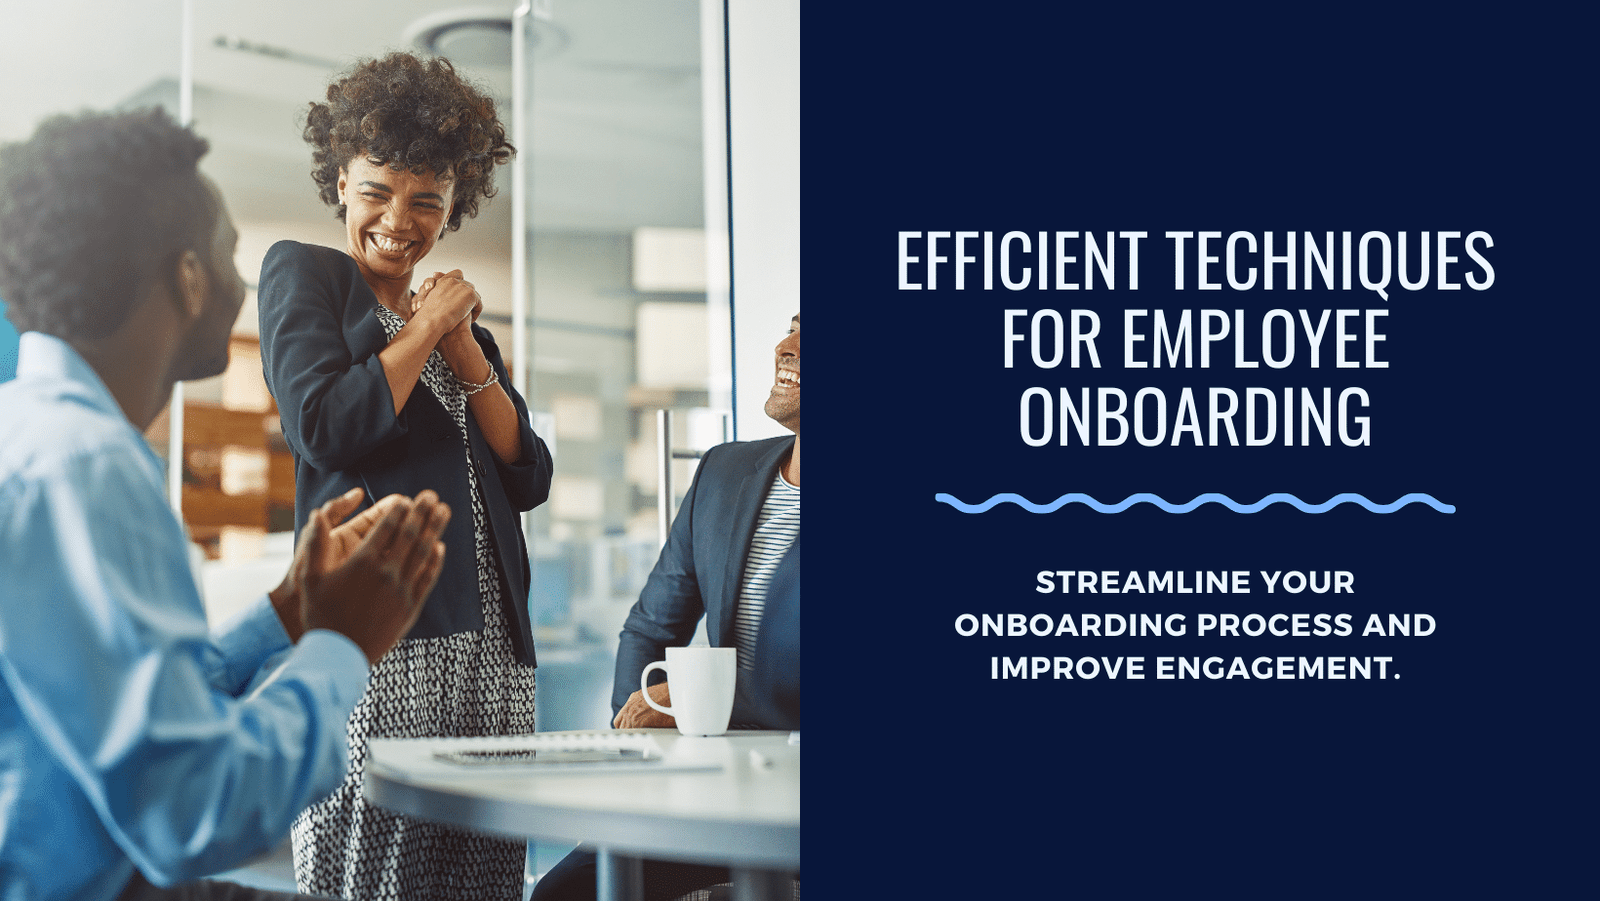 Increasing Worker Engagement with Efficient Onboarding Techniques